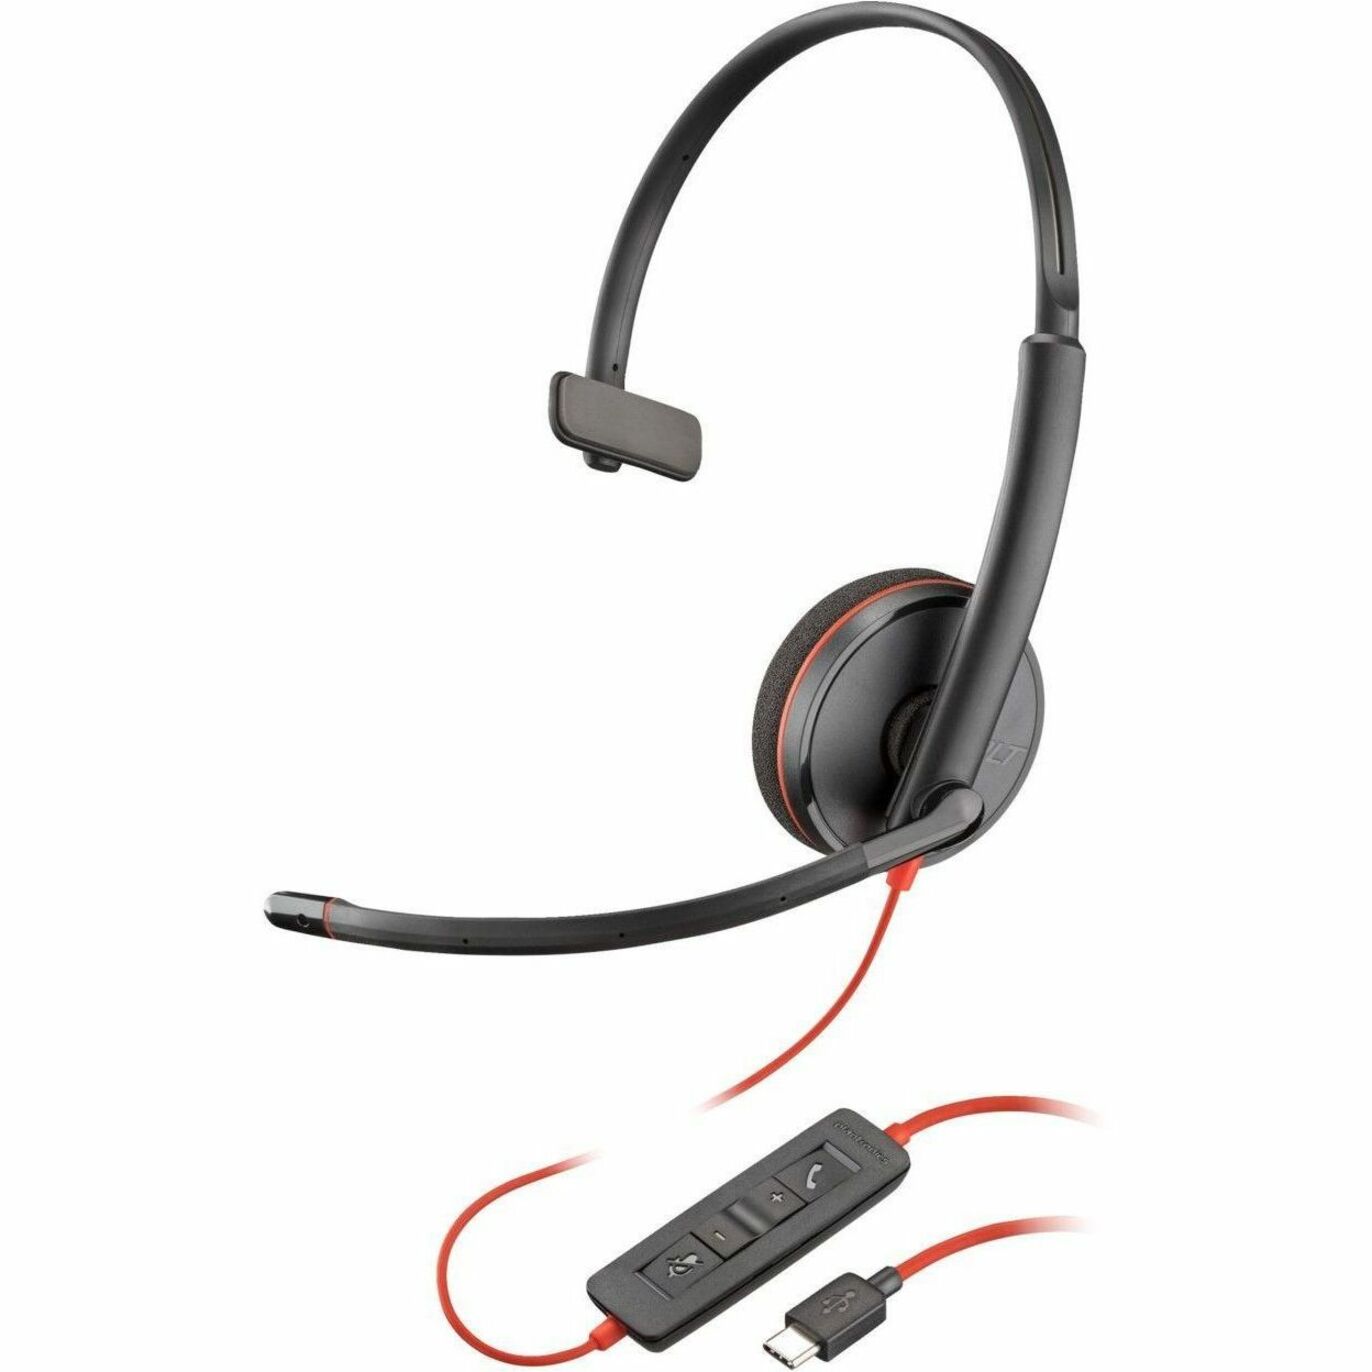 Poly 80S09A6 Blackwire 3210 Headset, Monaural On-ear USB Type C, Mini-phone (3.5mm), Noise Cancelling